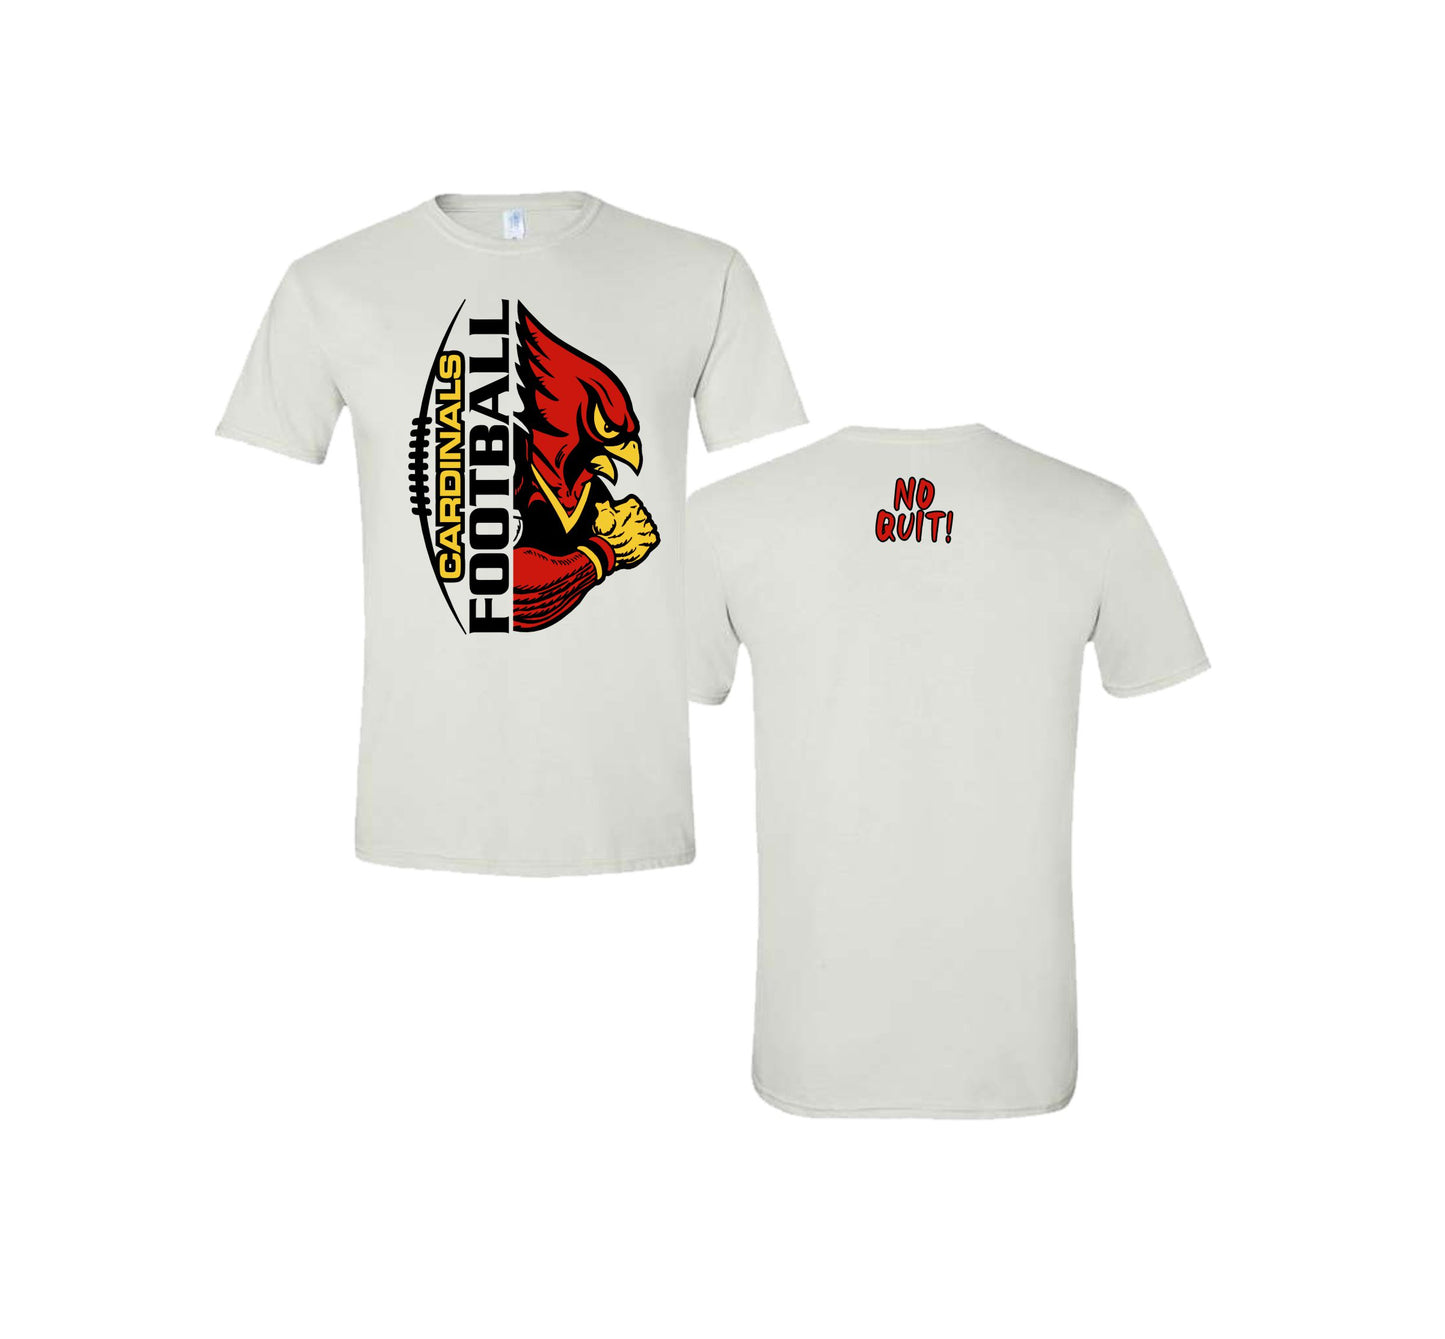 CARDINALS FOOTBALL - 52969251  (WHITE) - (CAN BE CUSTOMIZED)